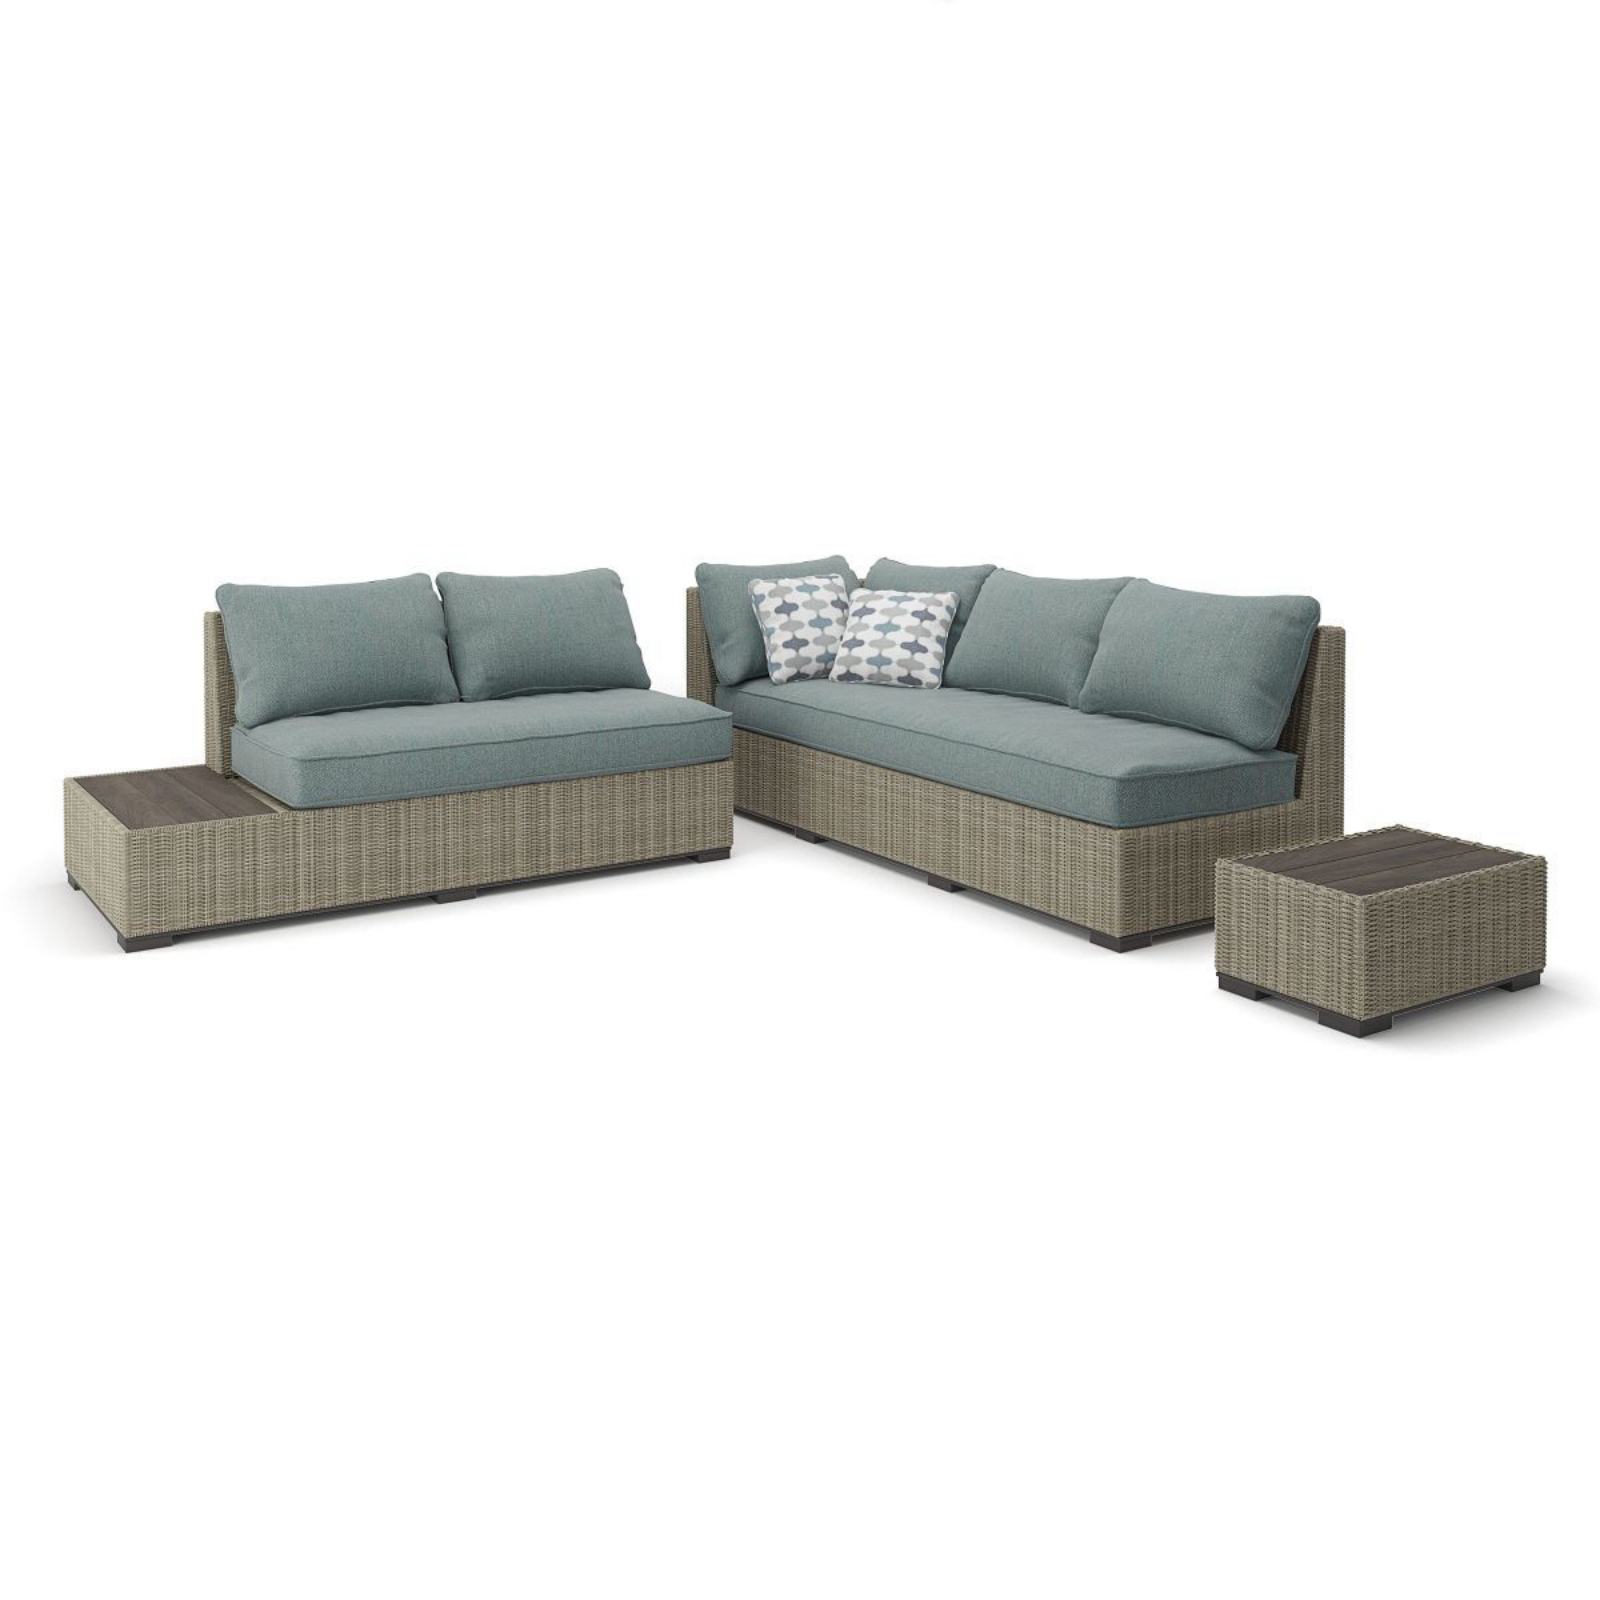 Picture of Silent Brook Patio Sectional with 2 End Tables